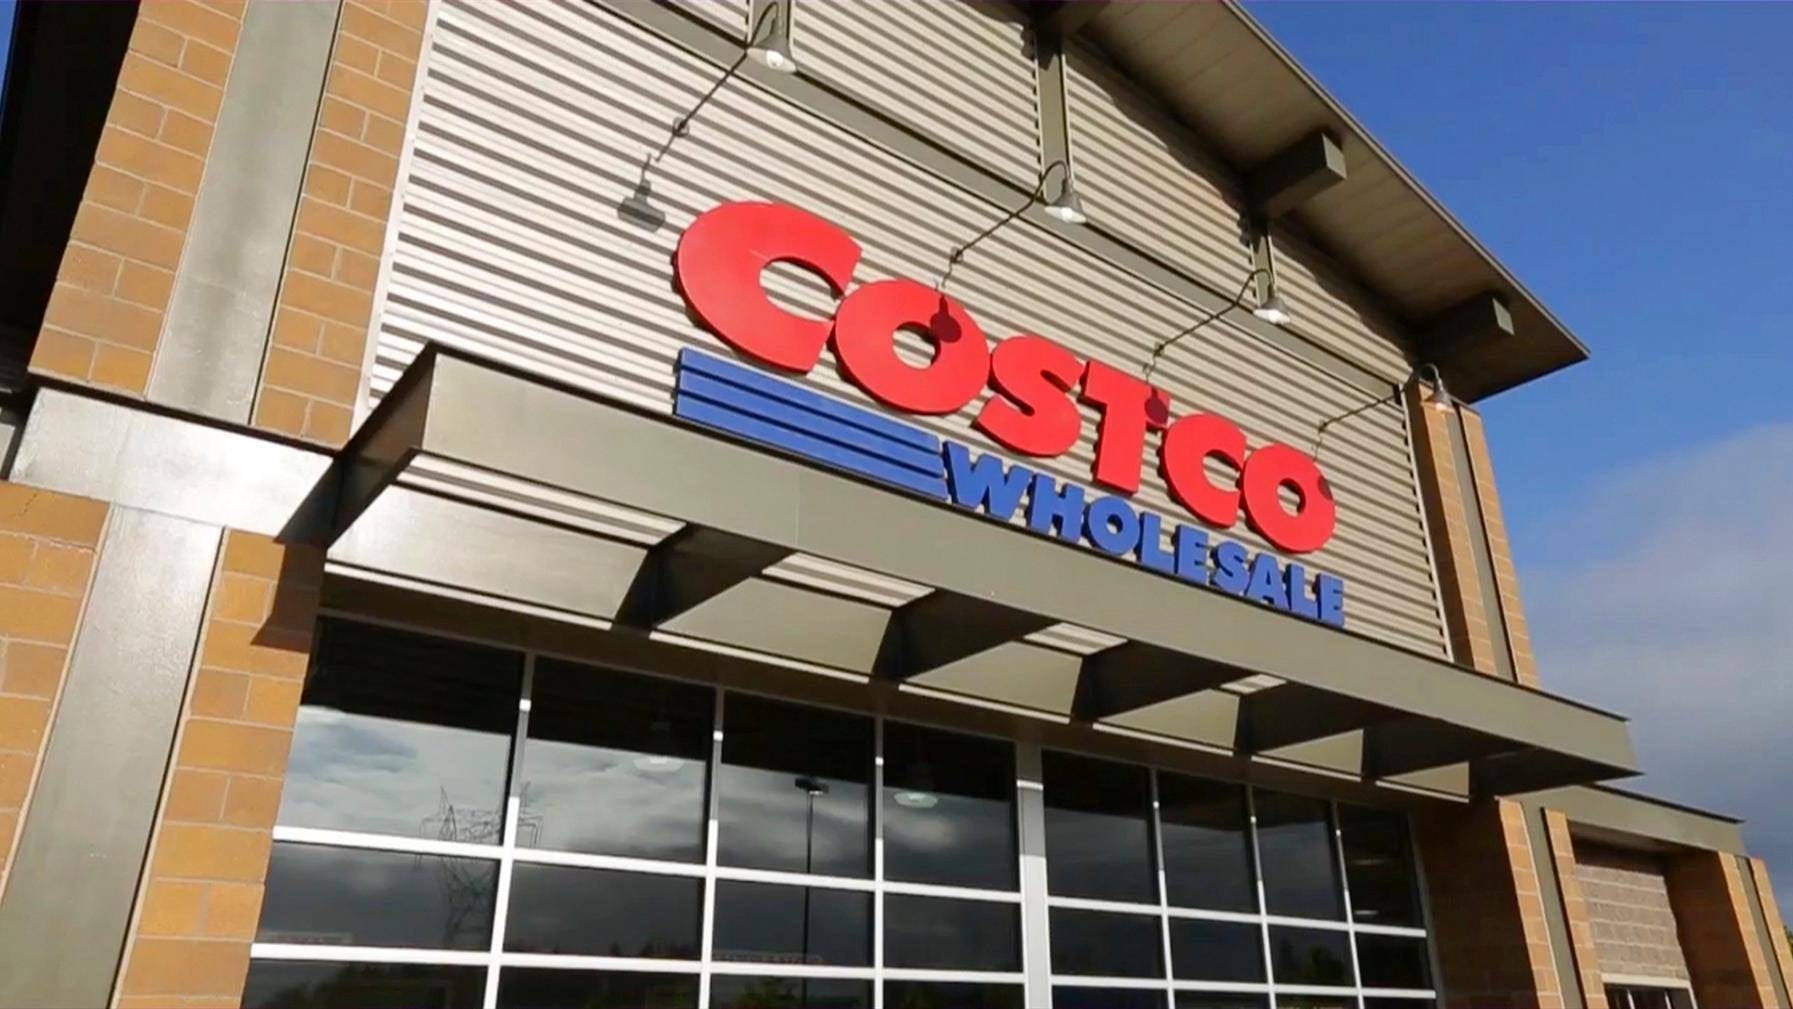 Costco plans to bring back samples after suspending the free snacks due to coronavirus pandemic - USA TODAY